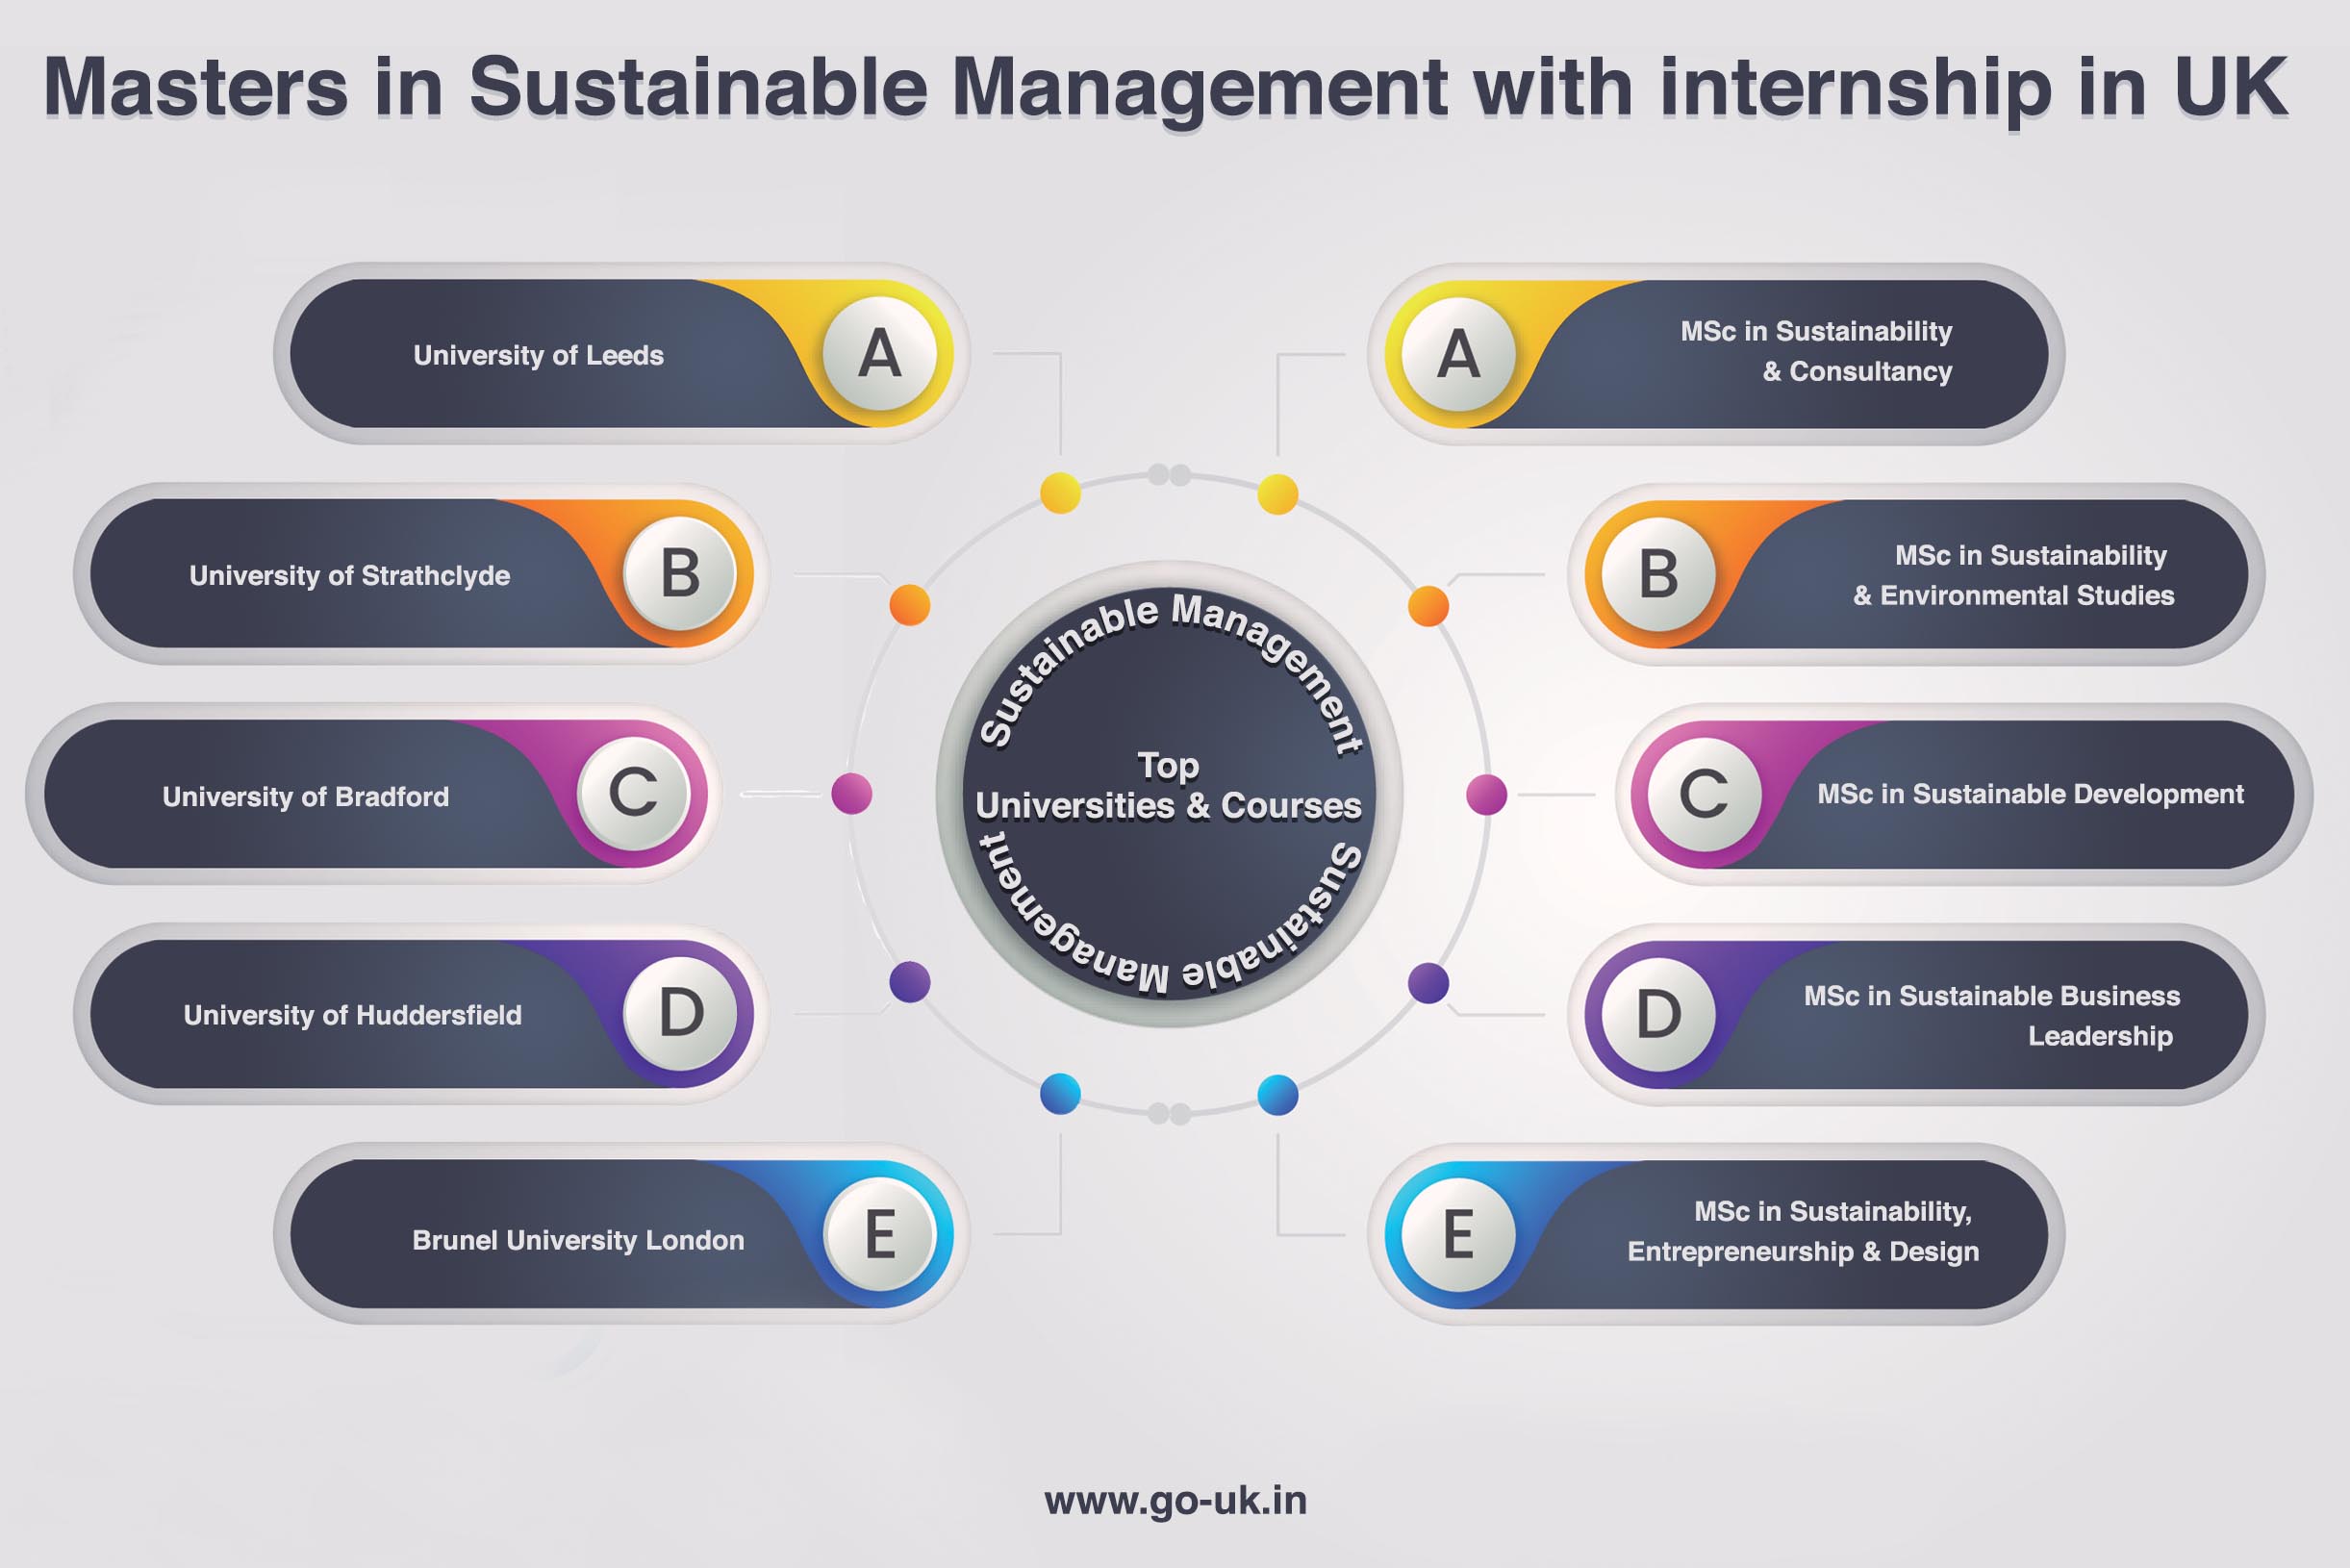 Masters in Sustainable Management with Internship in UK